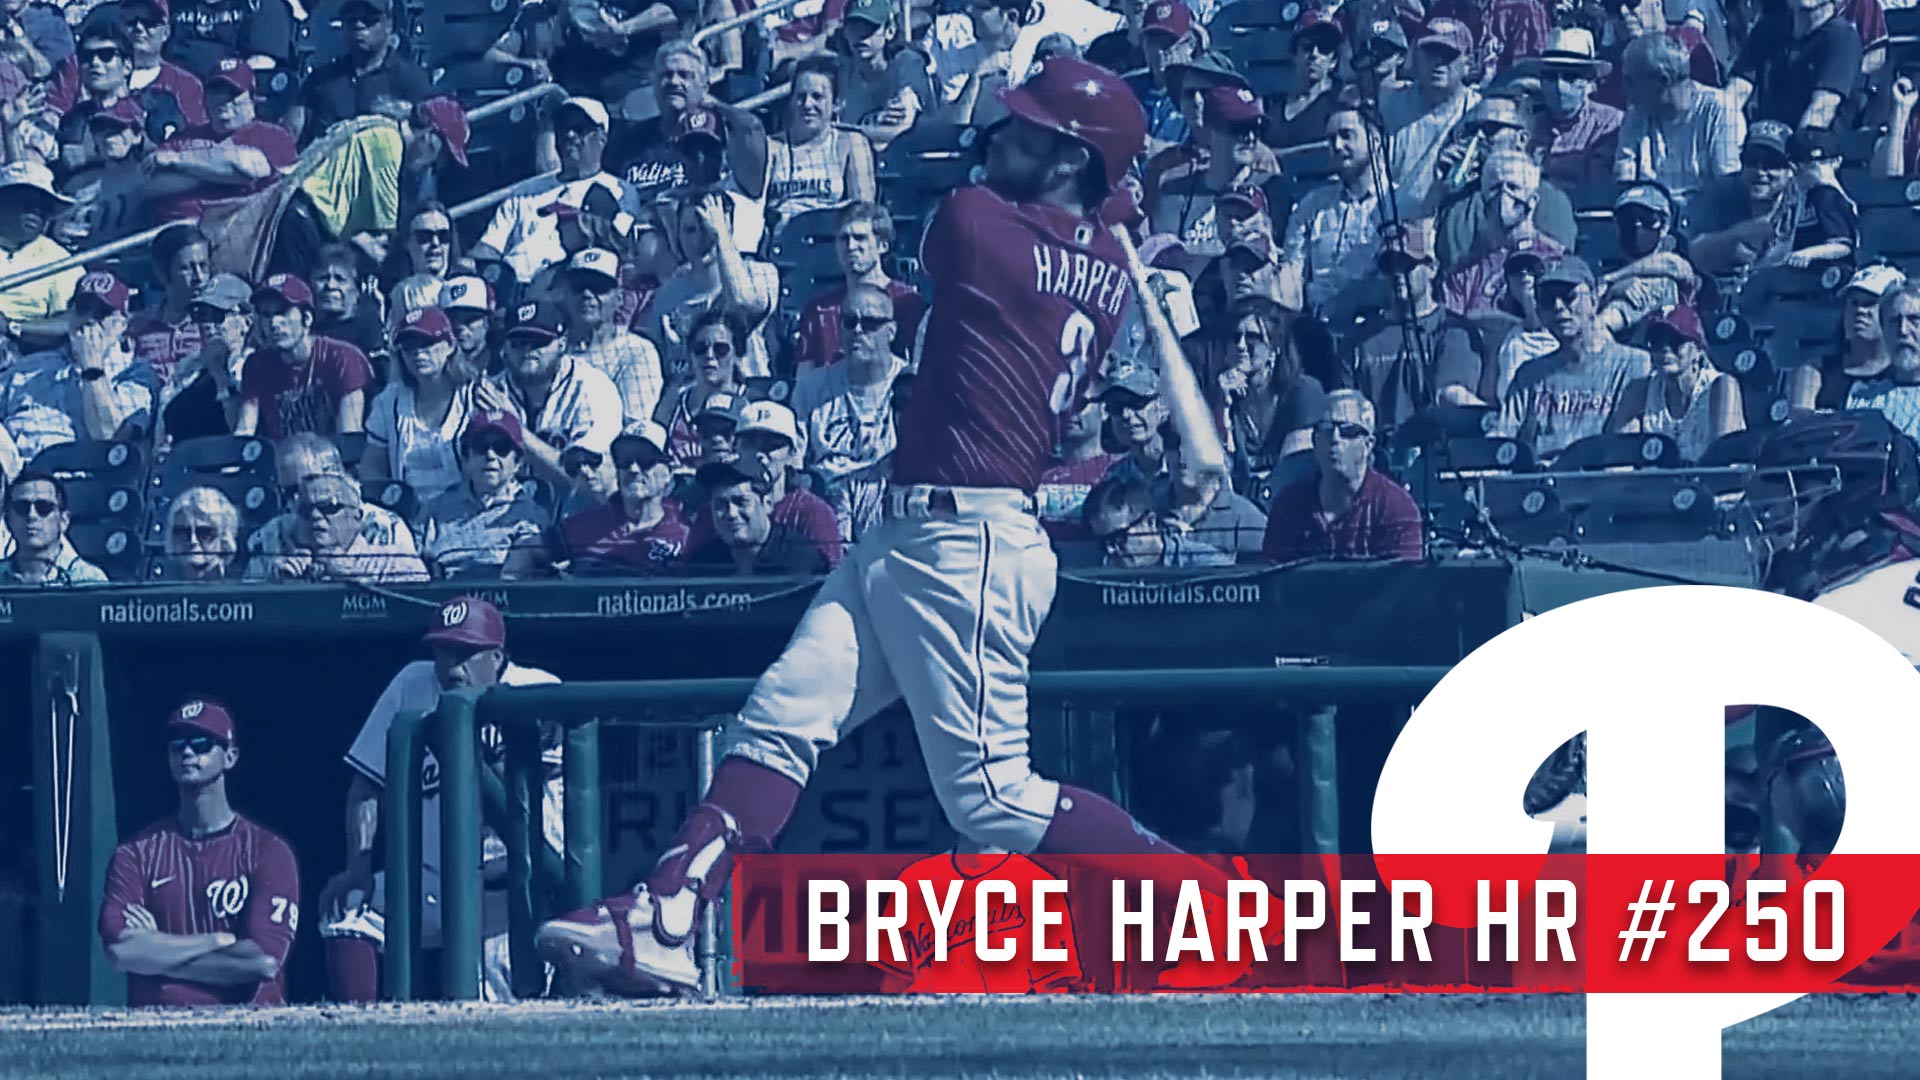 From Arkansas to Nats Park: The story of Bryce Harper's Home Run